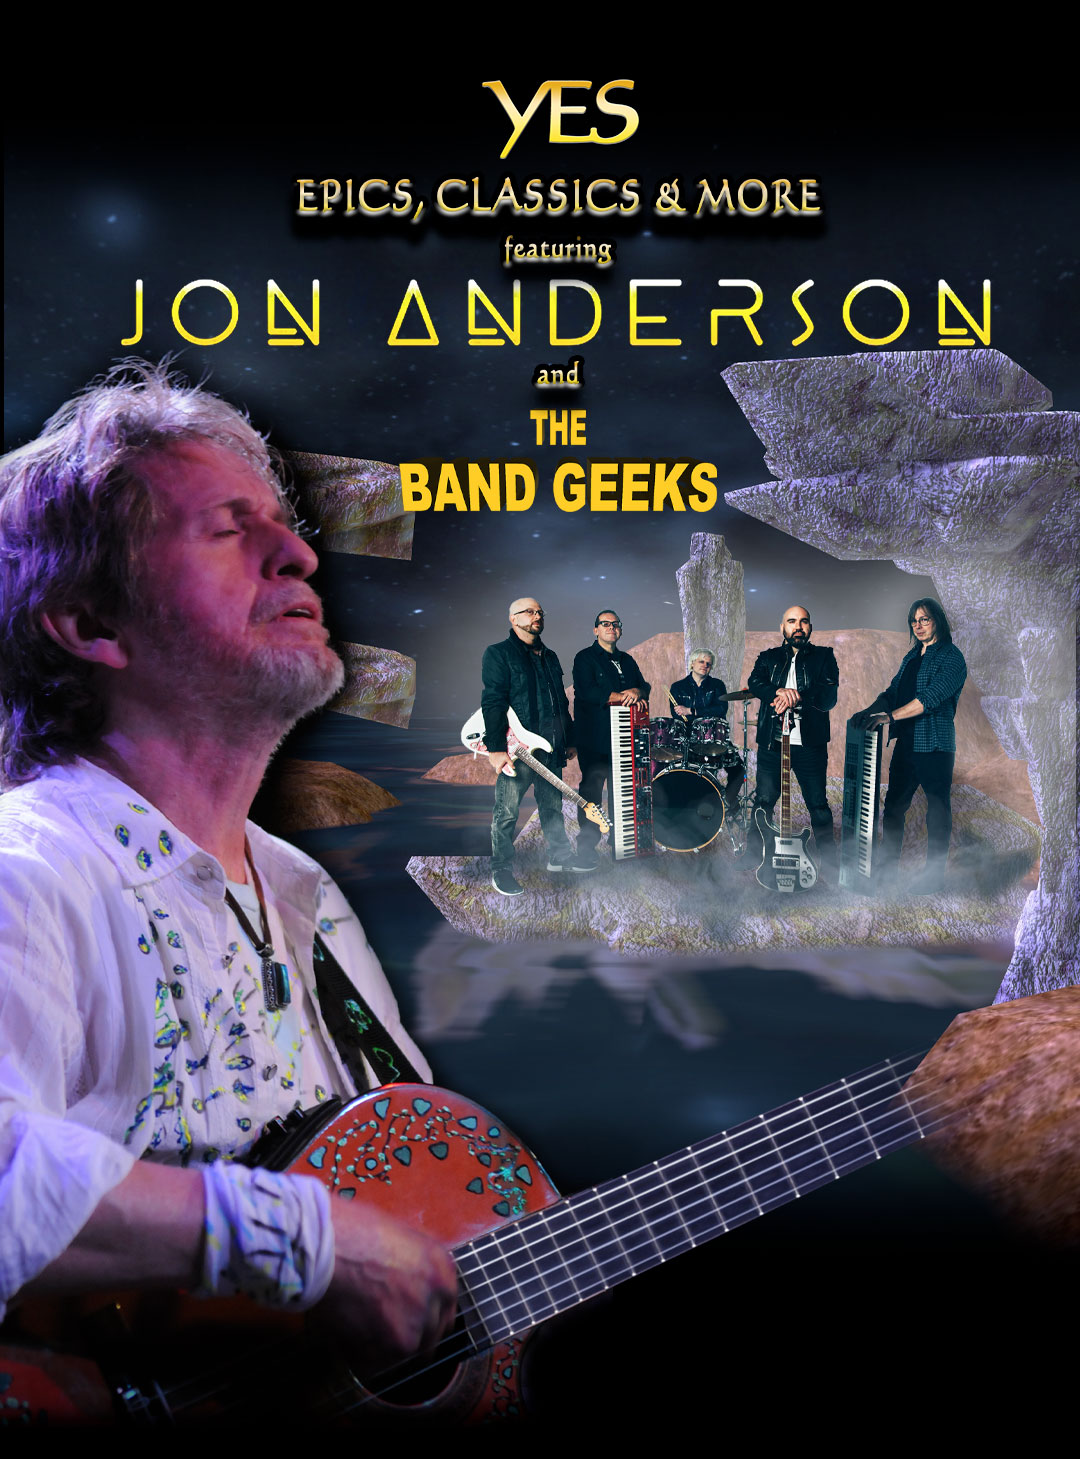 Image for YES Epics & Classics featuring Jon Anderson and The Band Geeks